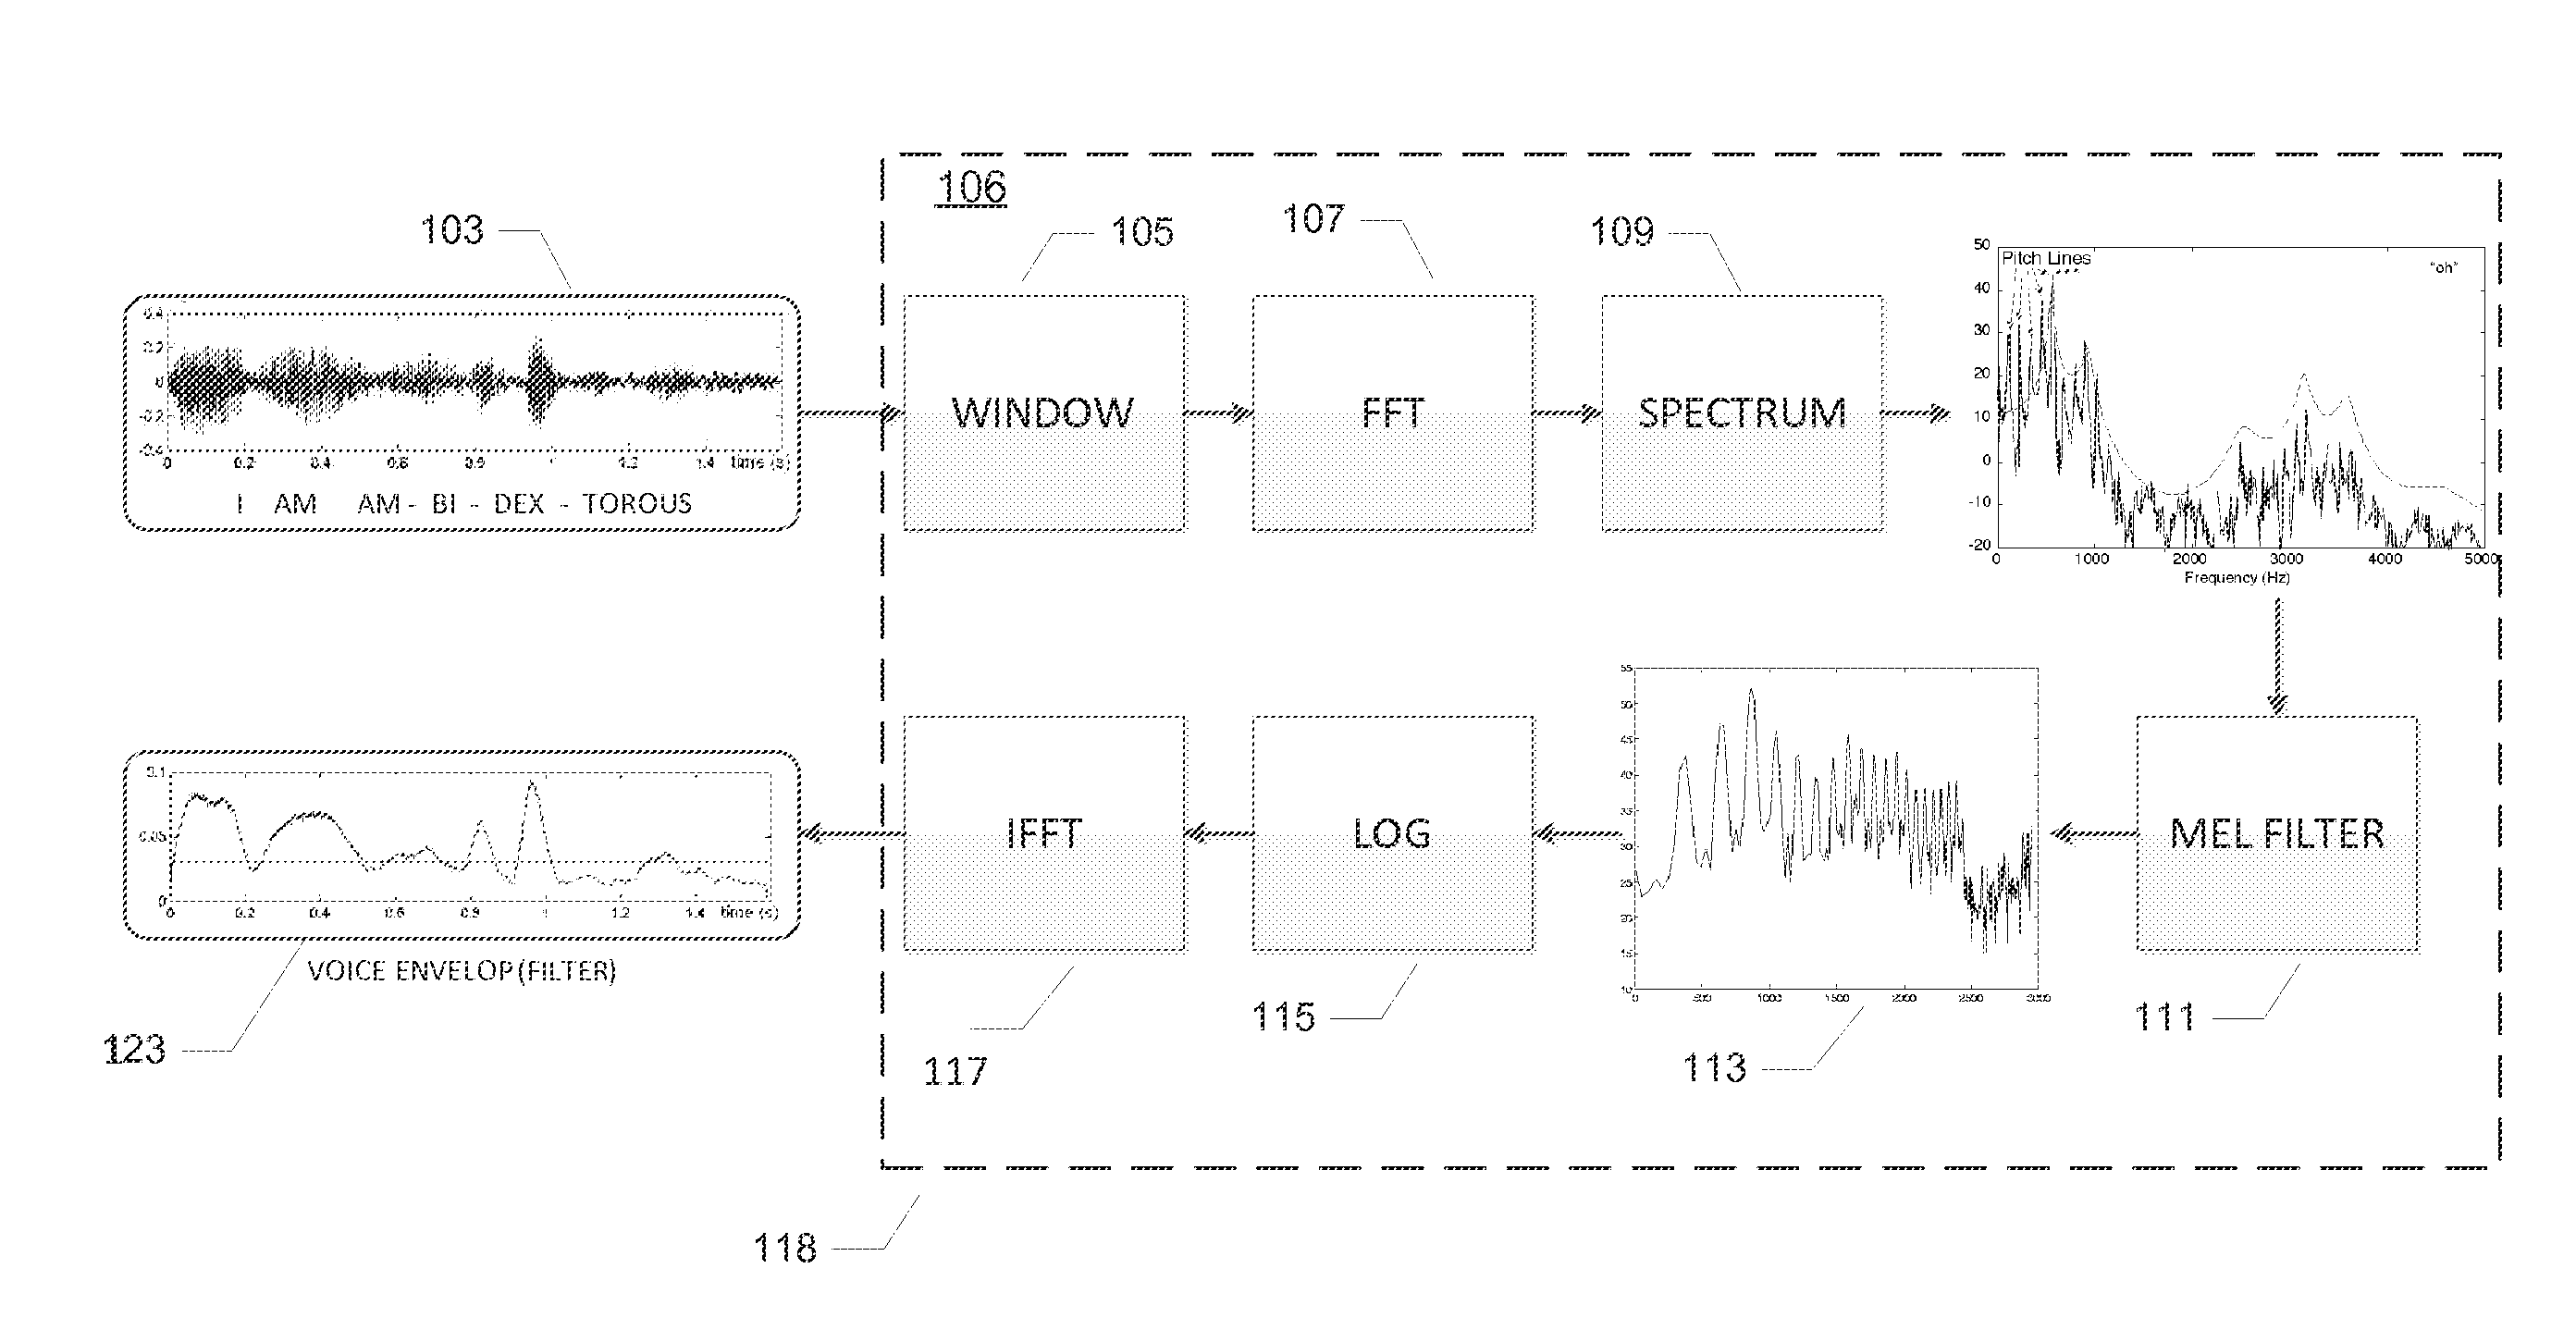 Microphone circuit assembly and system with speech recognition